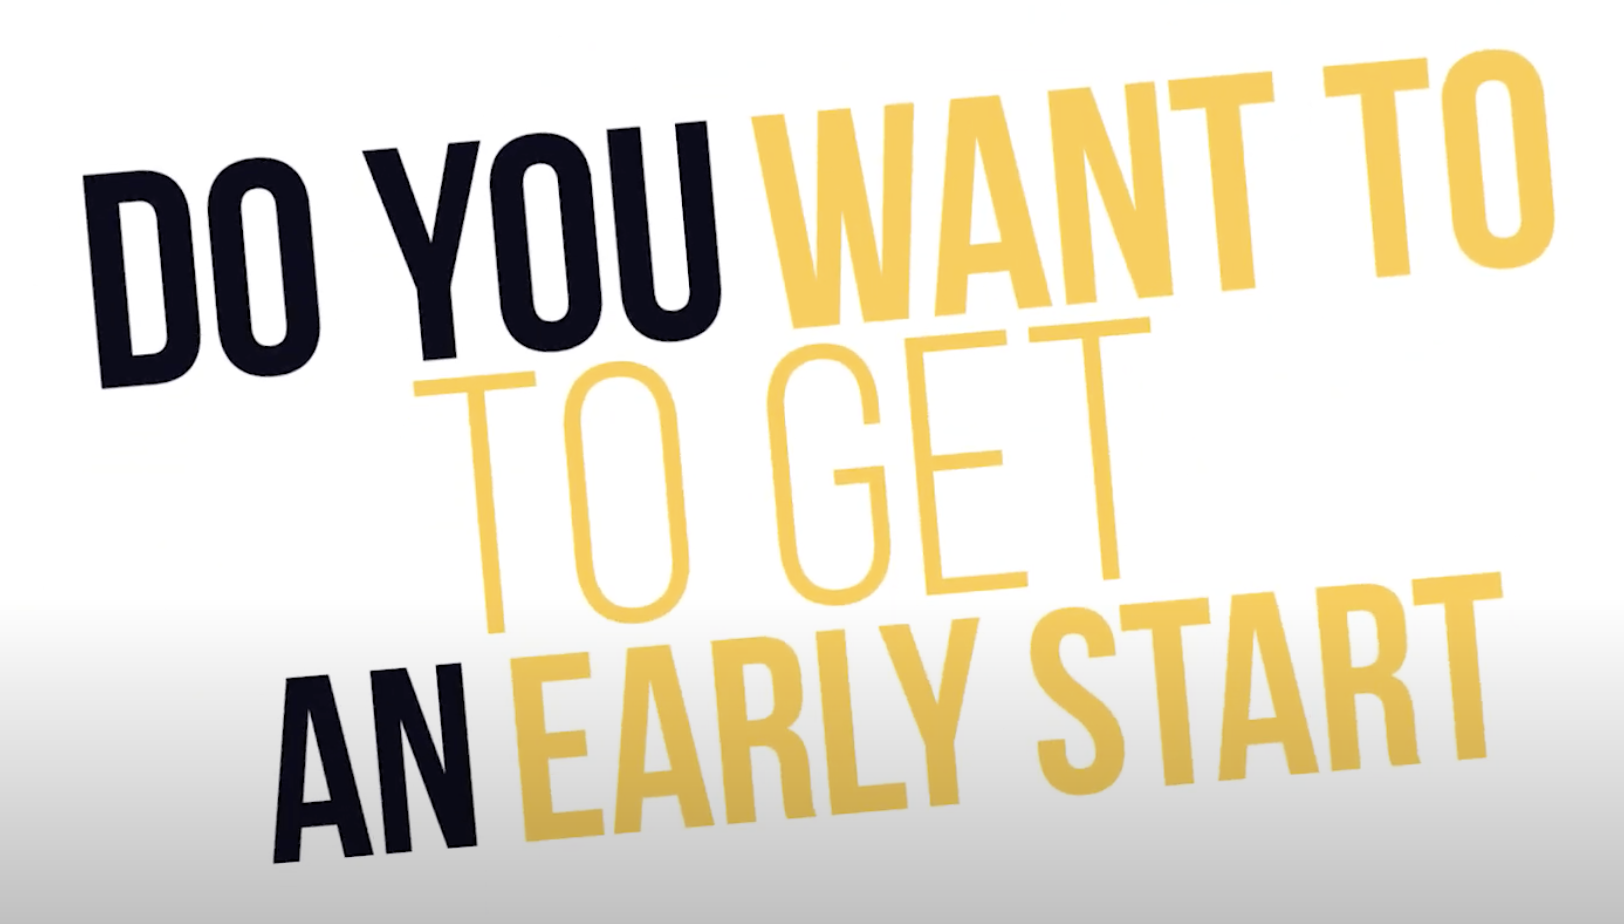 Yellow and black text, "Do You Want to Get an Early Start?"